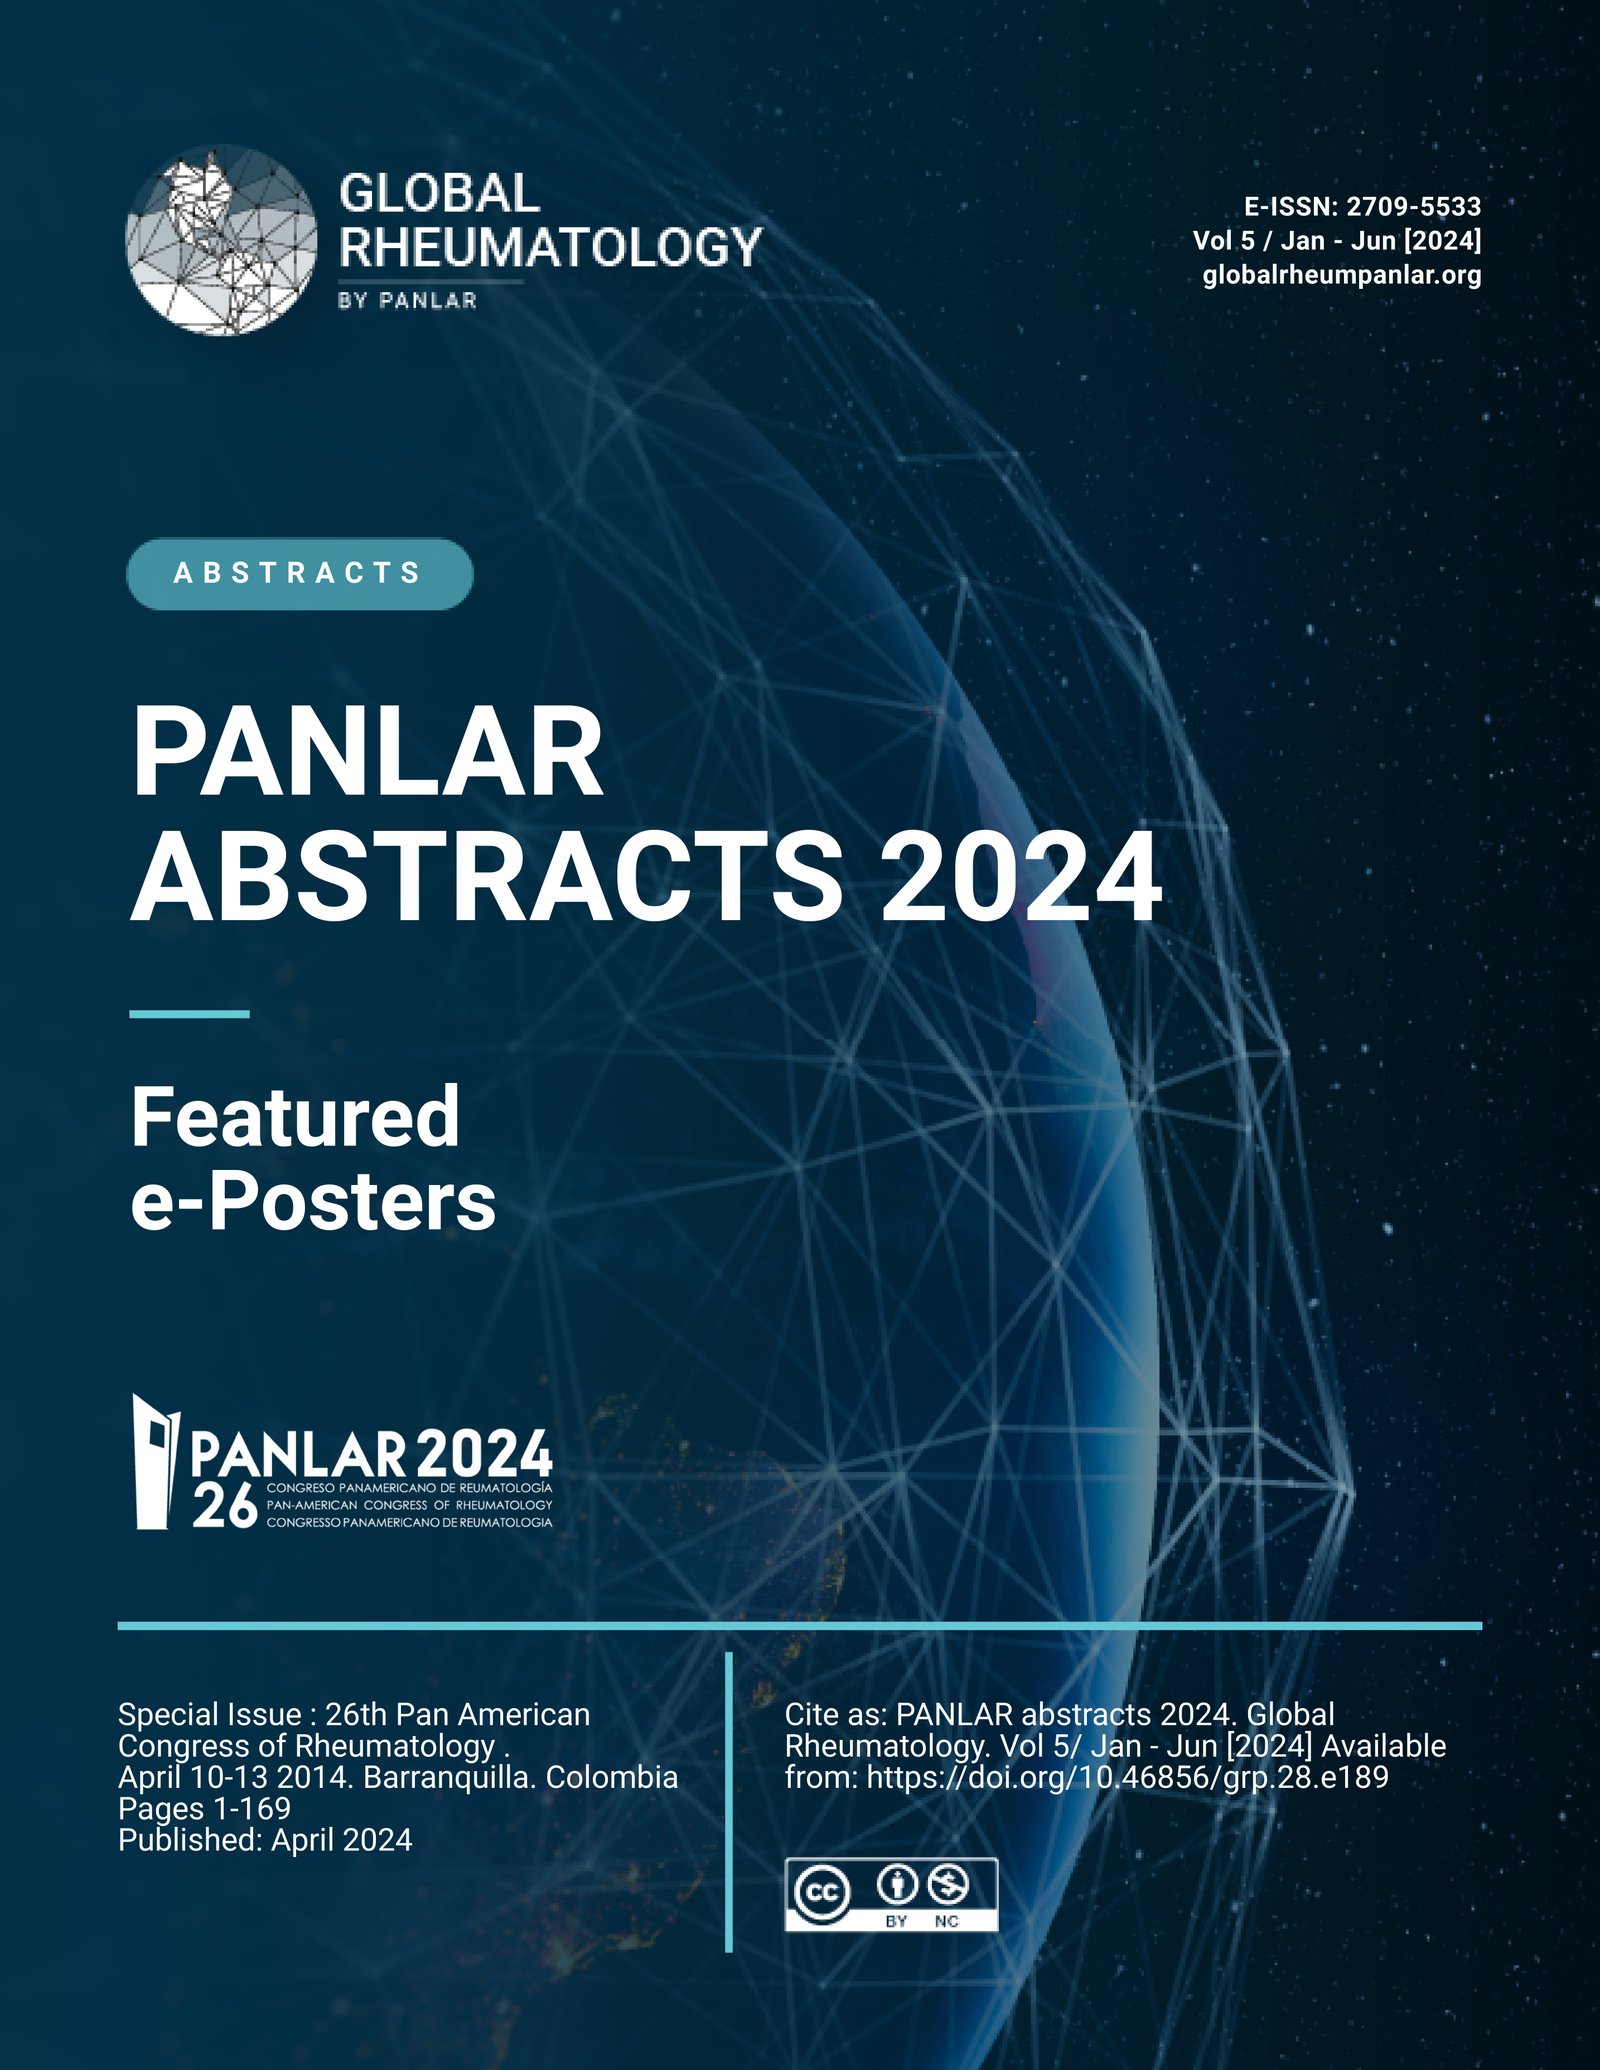 Featured e-posters 